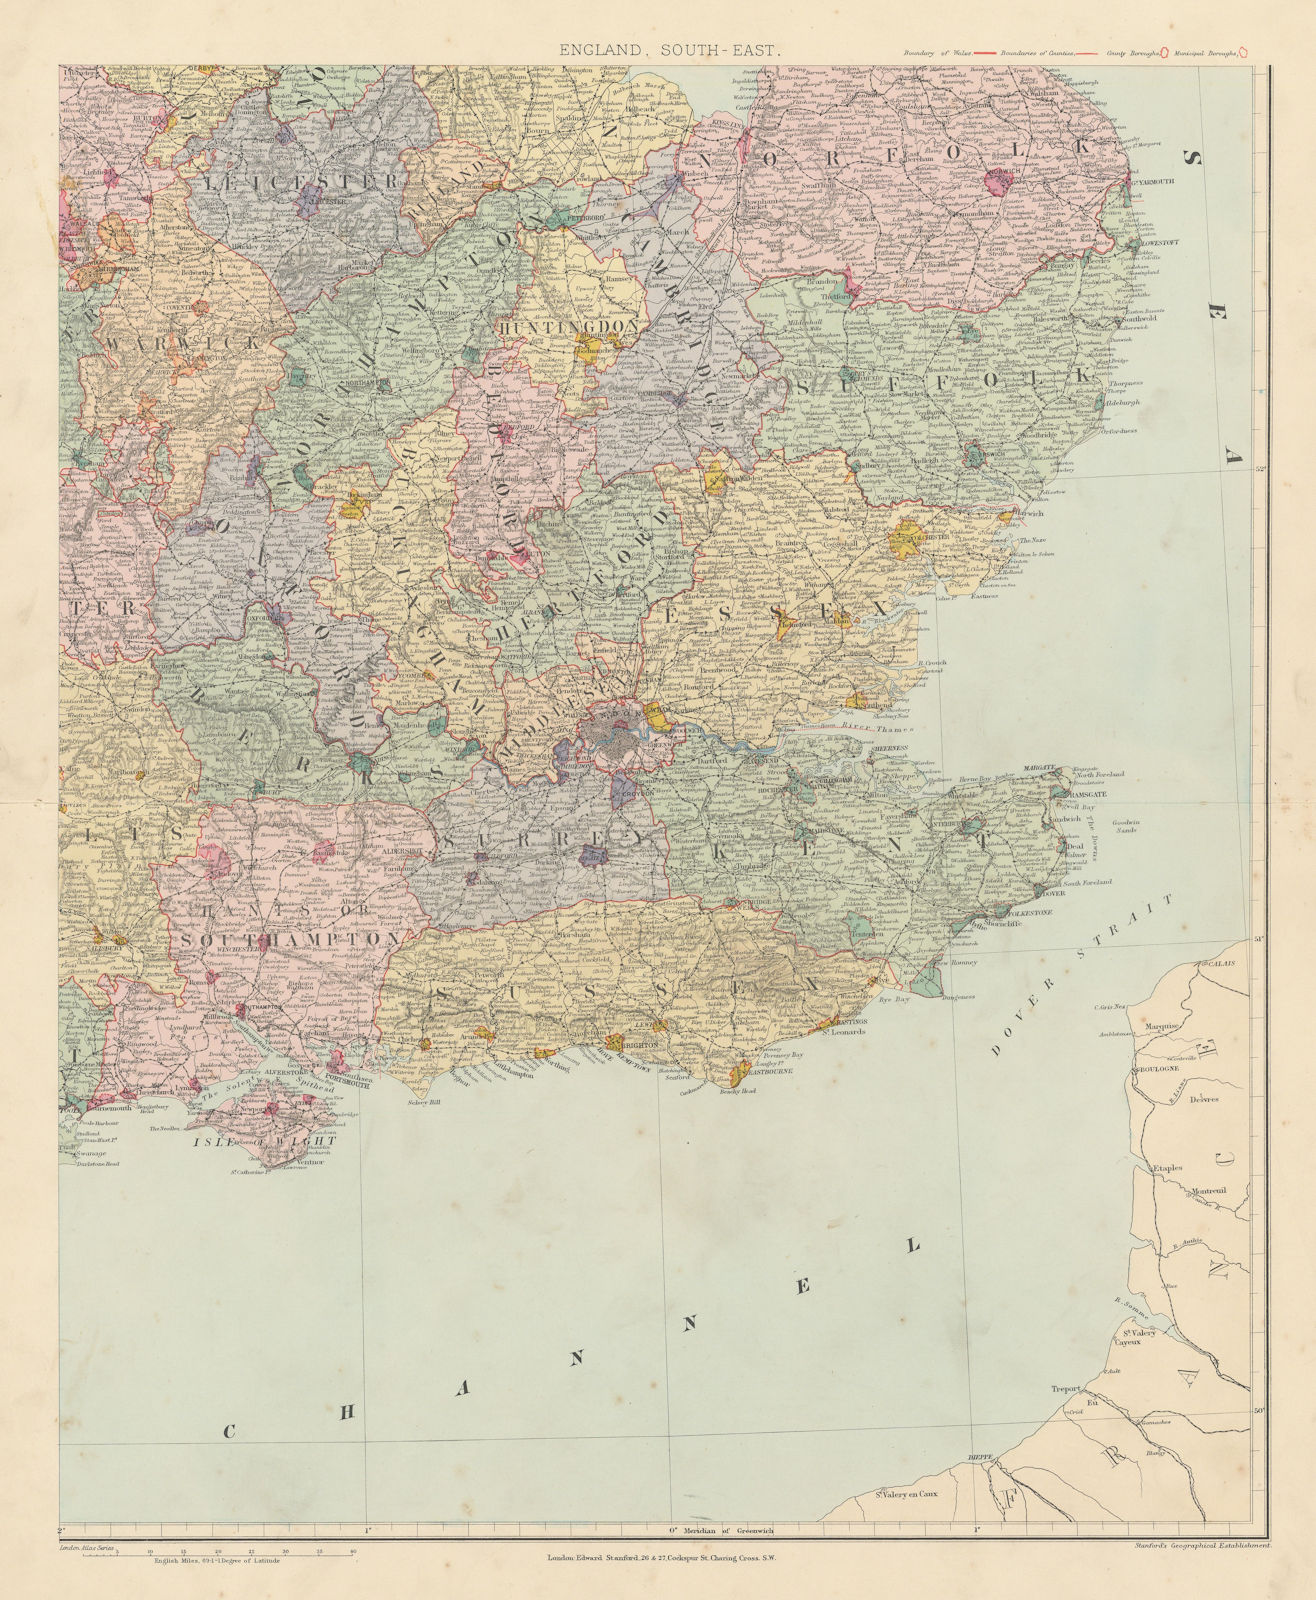 Associate Product South east England. Counties & boroughs. Large 61x50cm. STANFORD 1894 old map